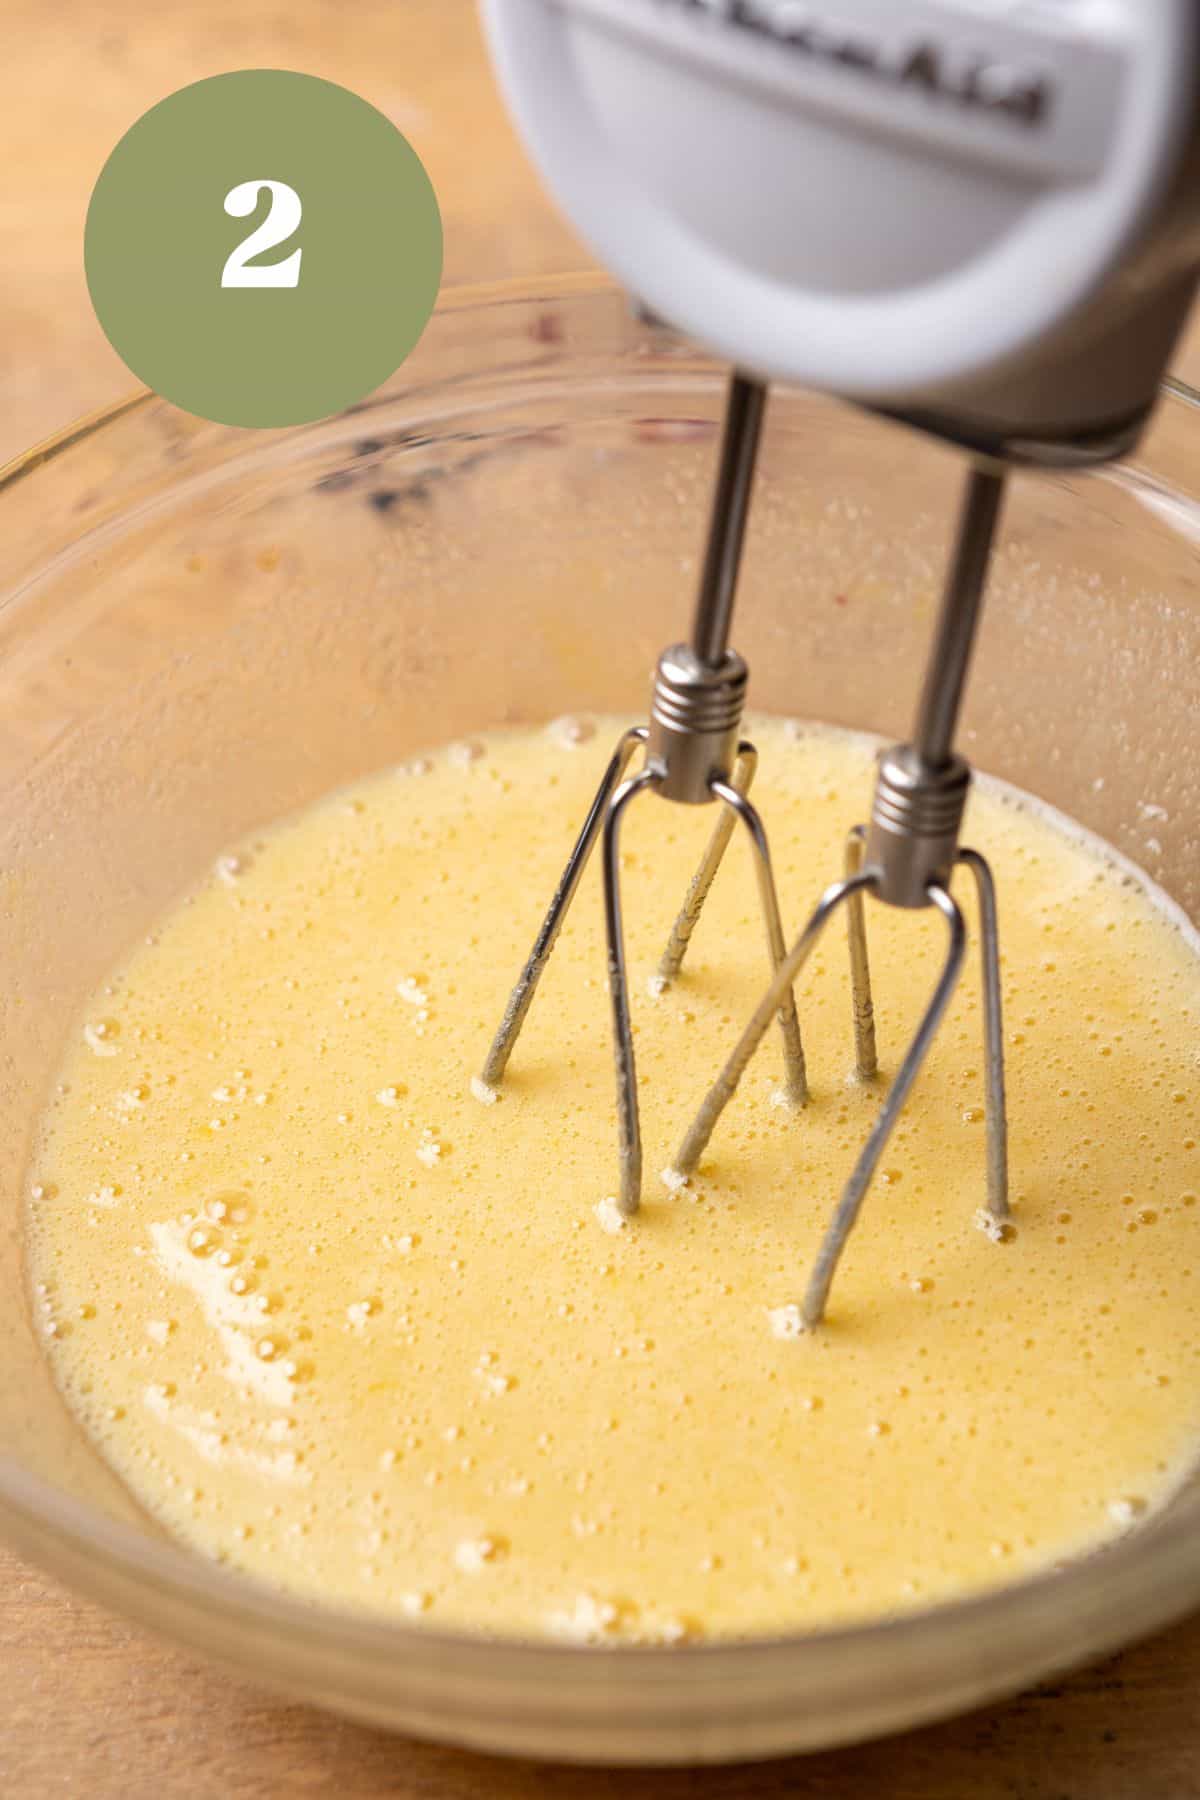 Eggs and sugar mixed together in a bowl with an electric mixer.